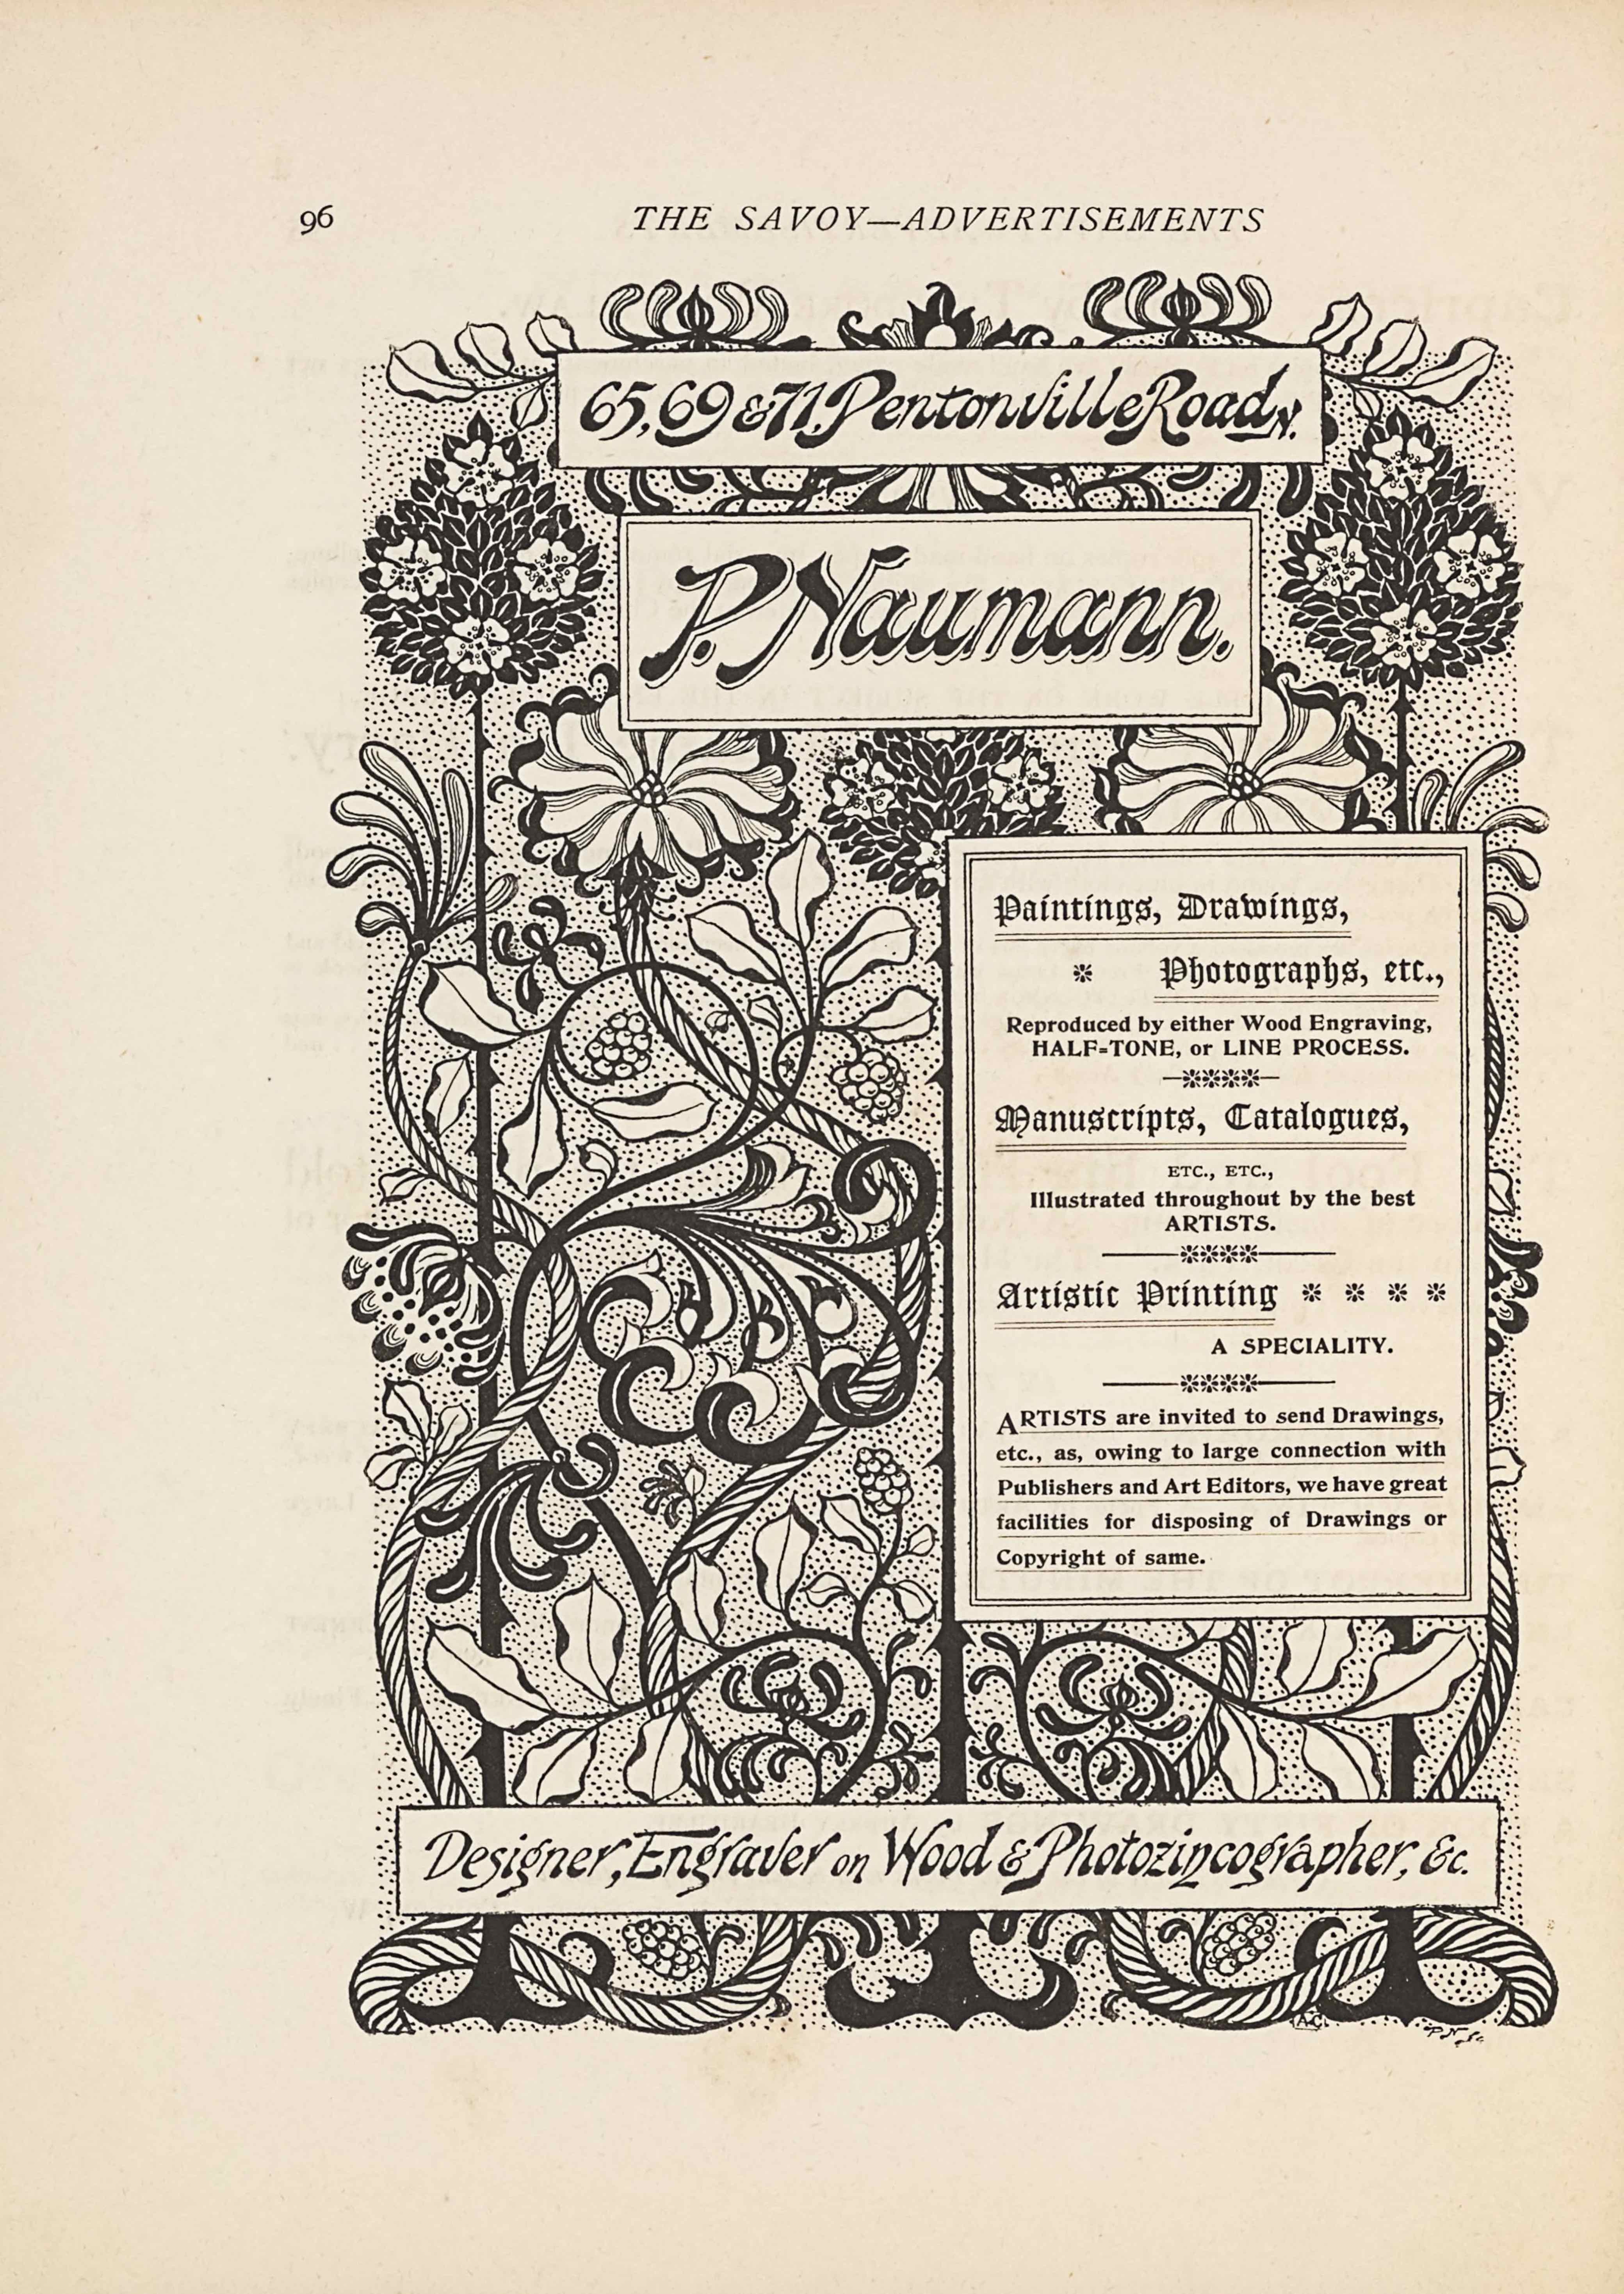 The image is in portrait orientation. The image is an advertisement for Paul Naumann’s services and shows four boxes of textual publishing information with a floral design behind the boxes. At the bottom edge of the page are the roots of the flowers that extend up to the top edge. There are three roots based at the bottom edge. The roots are evenly spaced out across the width of the page. The roots appear as curled horizontal lines cut through in the middle with straight vertical lines. The roots and flower stalks are all dark coloured. Around the roots at the bottom edge is a looping piece of vine that looks like a rope. The vines then extend up vertically and wrap around the two exterior flowers all the way up the page. There is a bunch of berries in the middle two spaces between the flower stalks. Slightly up the page from the bottom edge is a long rectangular text box. In the single-edge box is the text: “Designer, Engraver on Wood & Photozincographer, &c.” The text is italicized and black on a white background. Above the box in the background is the flower stalks and vines, with two branches of leaves extending out horizontally. Slightly above and only on the right half of the page is another text box. This box is tall and rectangular, with a double-edged border. The box contains the text: “Paintings, Drawings, // Photographs, etc., // Reproduced by either Wood Engraving, // HALF-TONE, [caps] or LINE PROCESS. [caps] // Manuscripts, Catalogues, // ETC., ETC., // Illustrated throughout by the best // ARTISTS. [caps] // Artistic Printing // A SPECIALTY. [caps] // ARTISTS [caps] are invited to send Drawings, // etc., as, owing to large connection with // Publishers and Art Editors, we have great // facilities for disposing of Drawings or // Copyright of same.” Just above this text box is where the flowers bloom out from their stalks. The three flowers from the dark roots are dark ovals of leaves with four white daffodil flowers evenly populated. The two flowers from the vines are light and the petals are patterned dark and light in a repetitive order. The centre dark flower and two vine flowers are in line just below the next text box, and the two outer edge dark flowers rise up higher on either side of the text box. The text box says: “P. Naumann.”. This is written in the largest and boldest text on the page, with a double-edged border around it. There is one more text box above it and this one says: “65, 69 & 71. Pentonville Road N.”. The box is bordered with a single line. Two more leaf branches extend out horizontally in the background of these two highest text boxes. Behind all the flowers and vines is a stippled background. There is no border around the image.